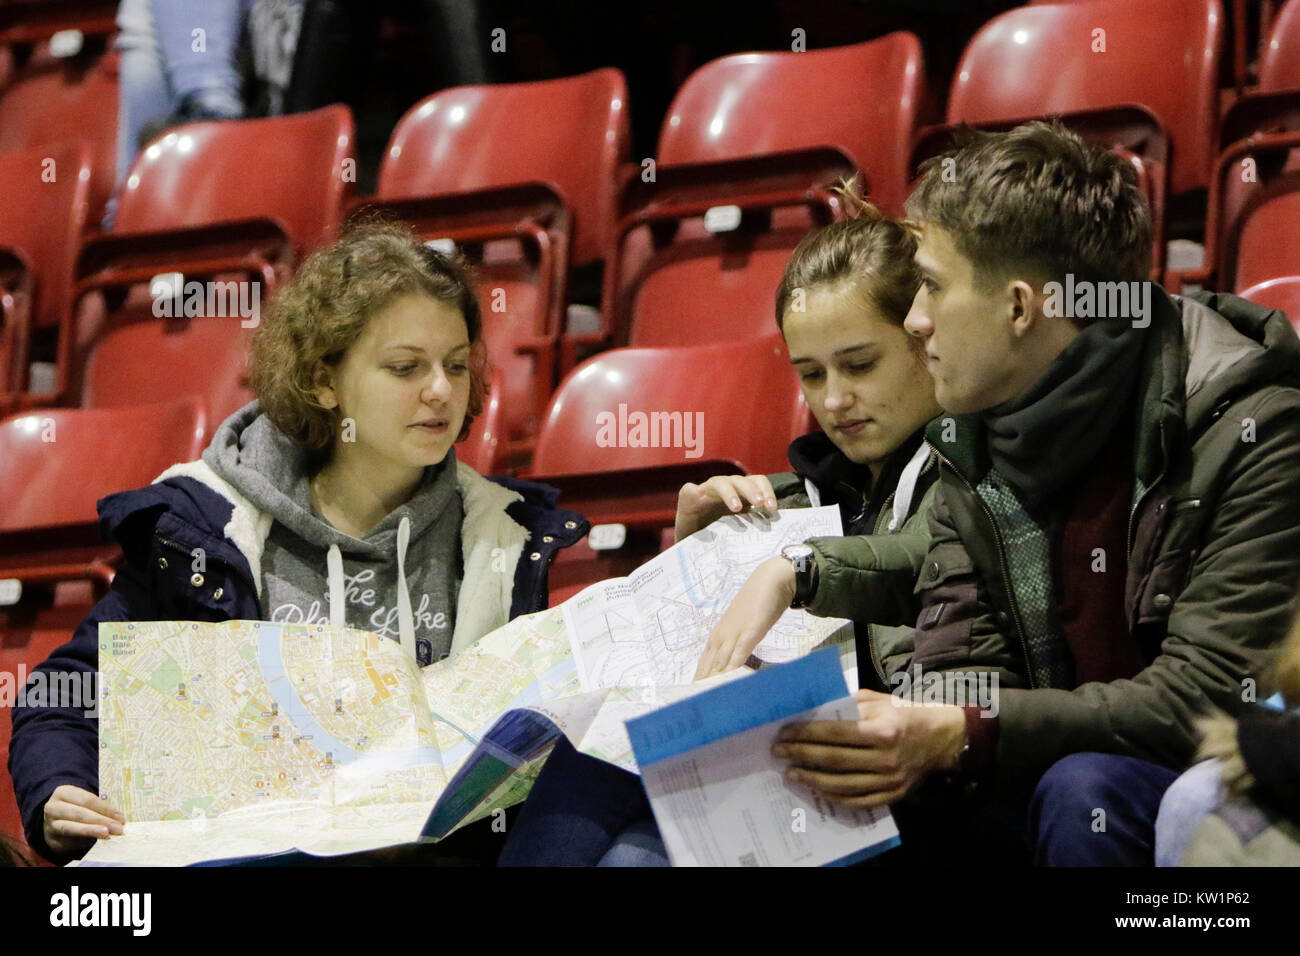 Basel, Switzerland. 28th Dec, 2017. Three pilgrims study a map, to see where they have to go, to find the parish they are assigned to. Several thousand young pilgrims from all over Europe and beyond arrived in Basel in Switzerland for the annual European Youth Meeting of the ecumenical Taize community. The meeting of prayers and meditation is held under the motto 'Pilgrimage of Trust on Earth' and is the 40th anniversary meeting. Credit: Michael Debets/Alamy Live News Stock Photo